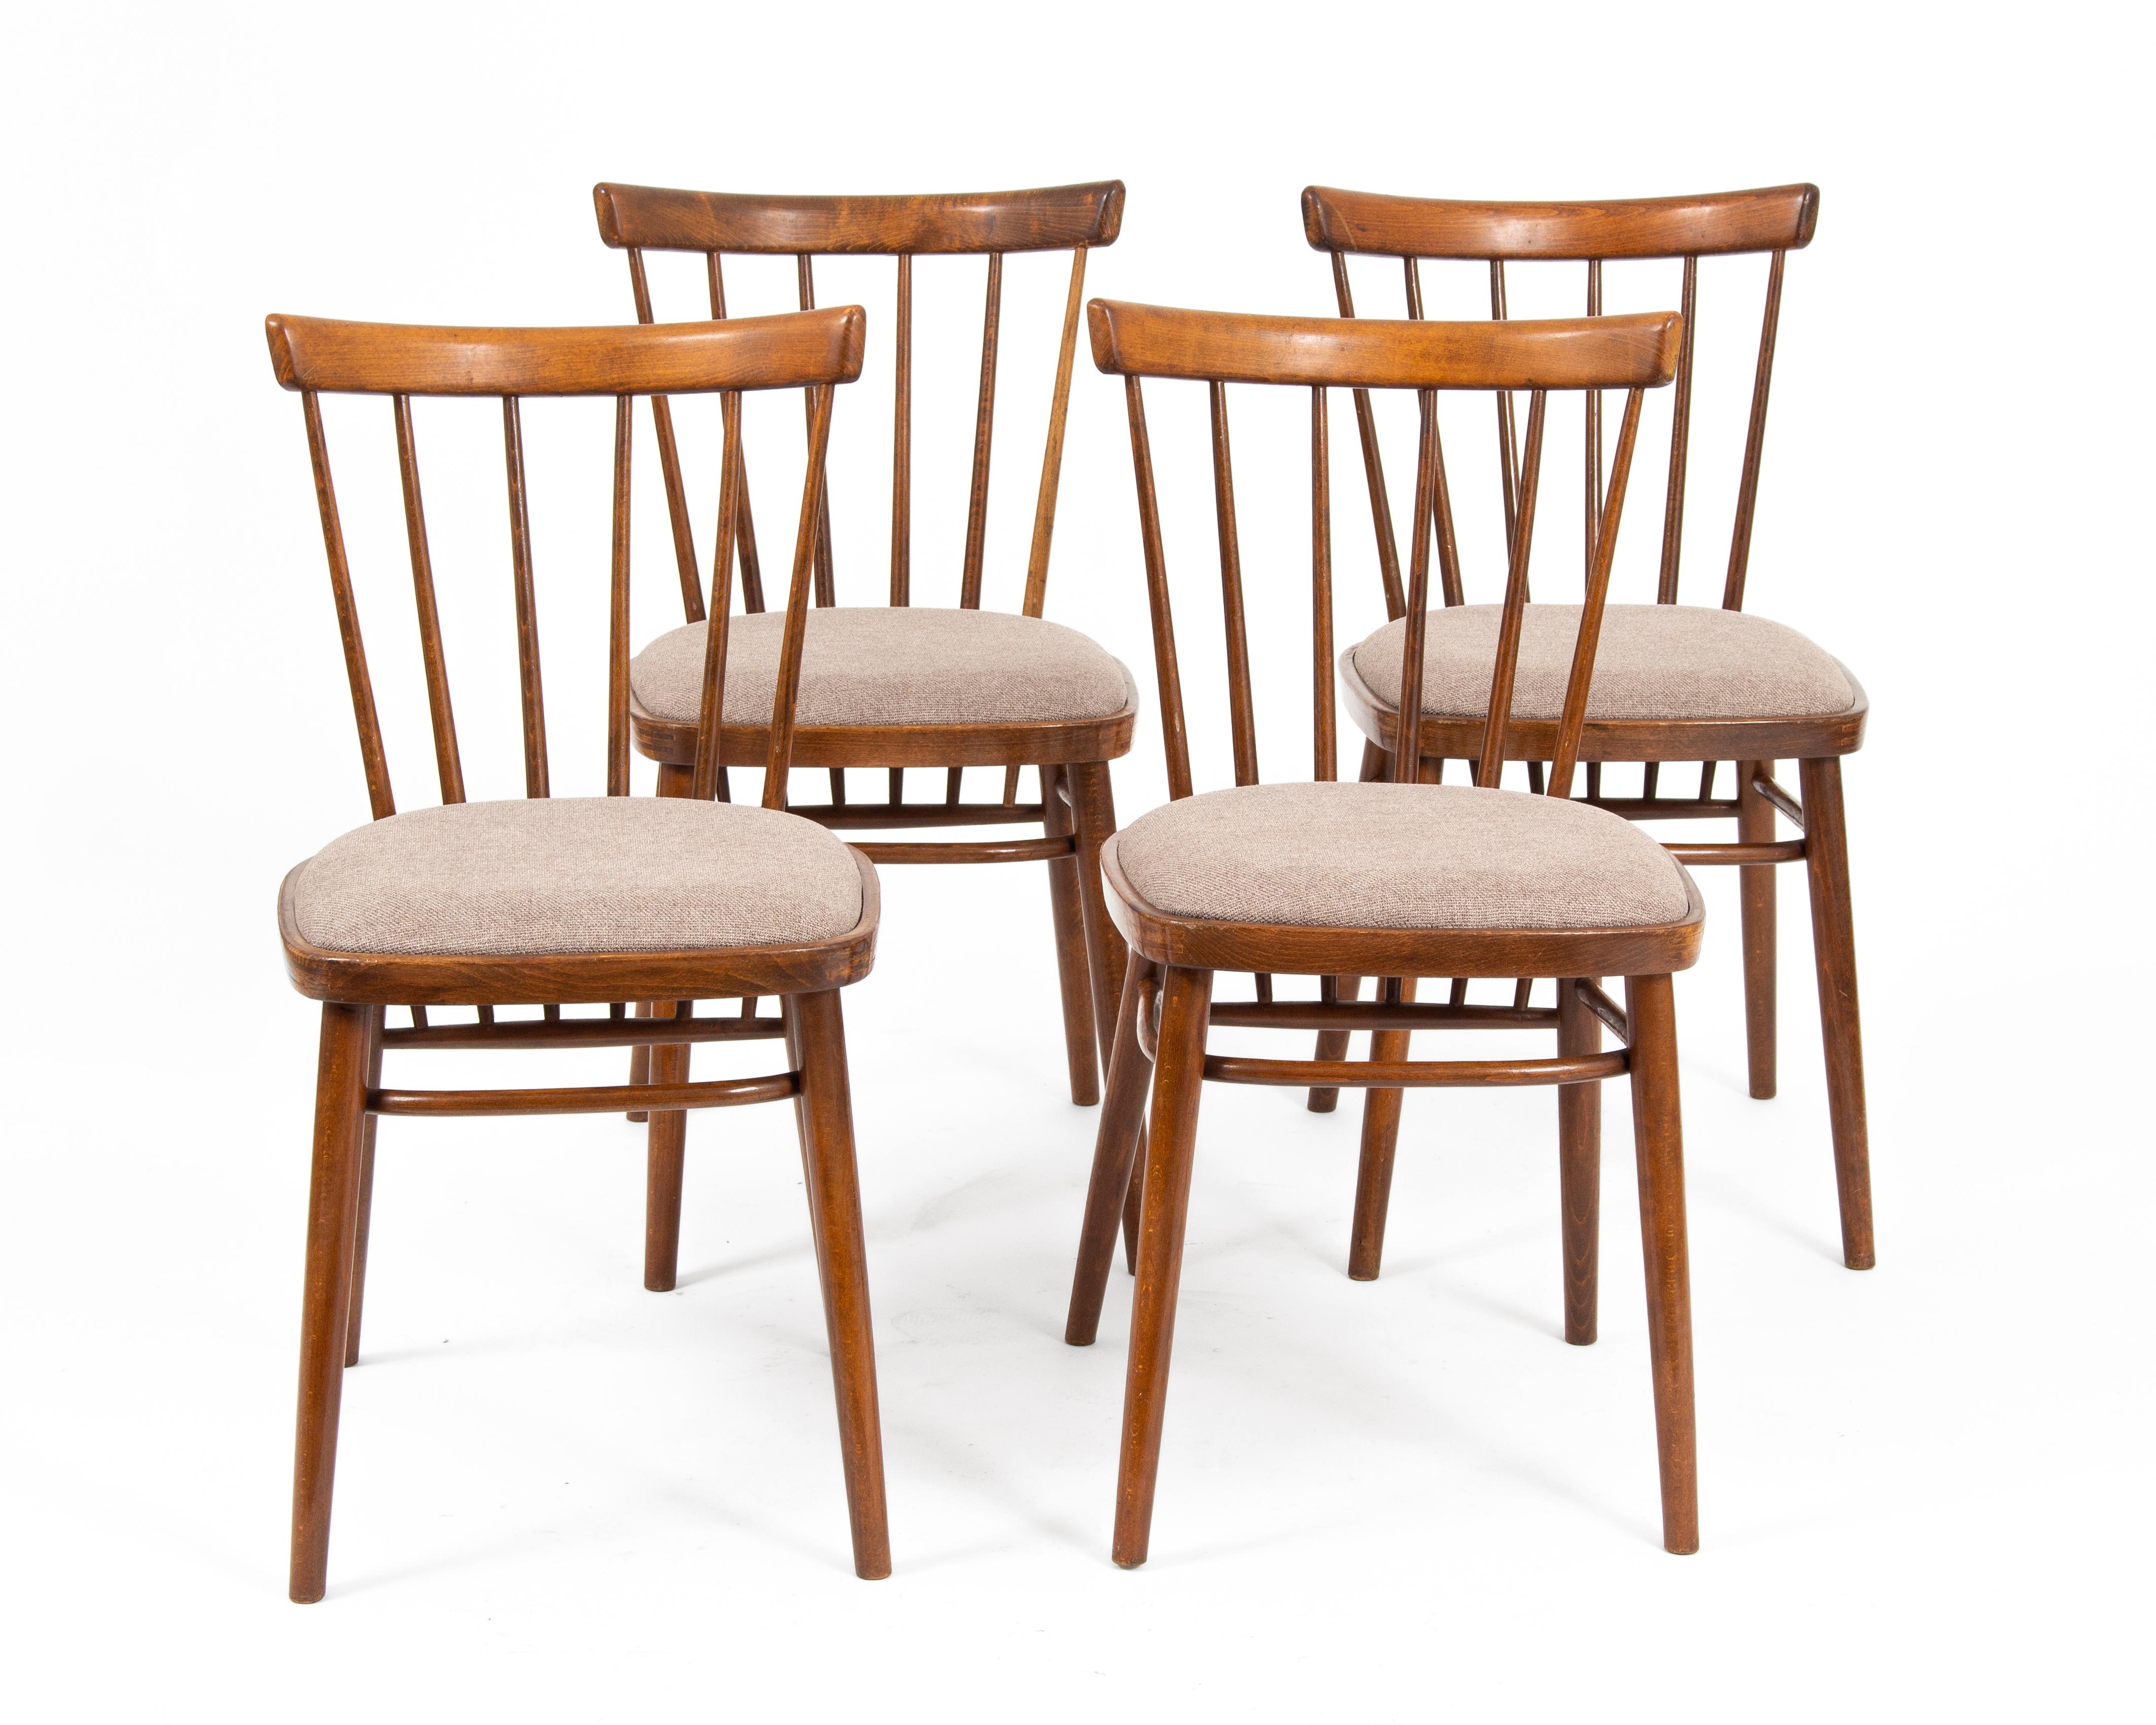 Set of Czechoslovakian Mid-Century Modern chairs.
Designed by Antonín Šuman, manufactured by Tatra in the 1970s.